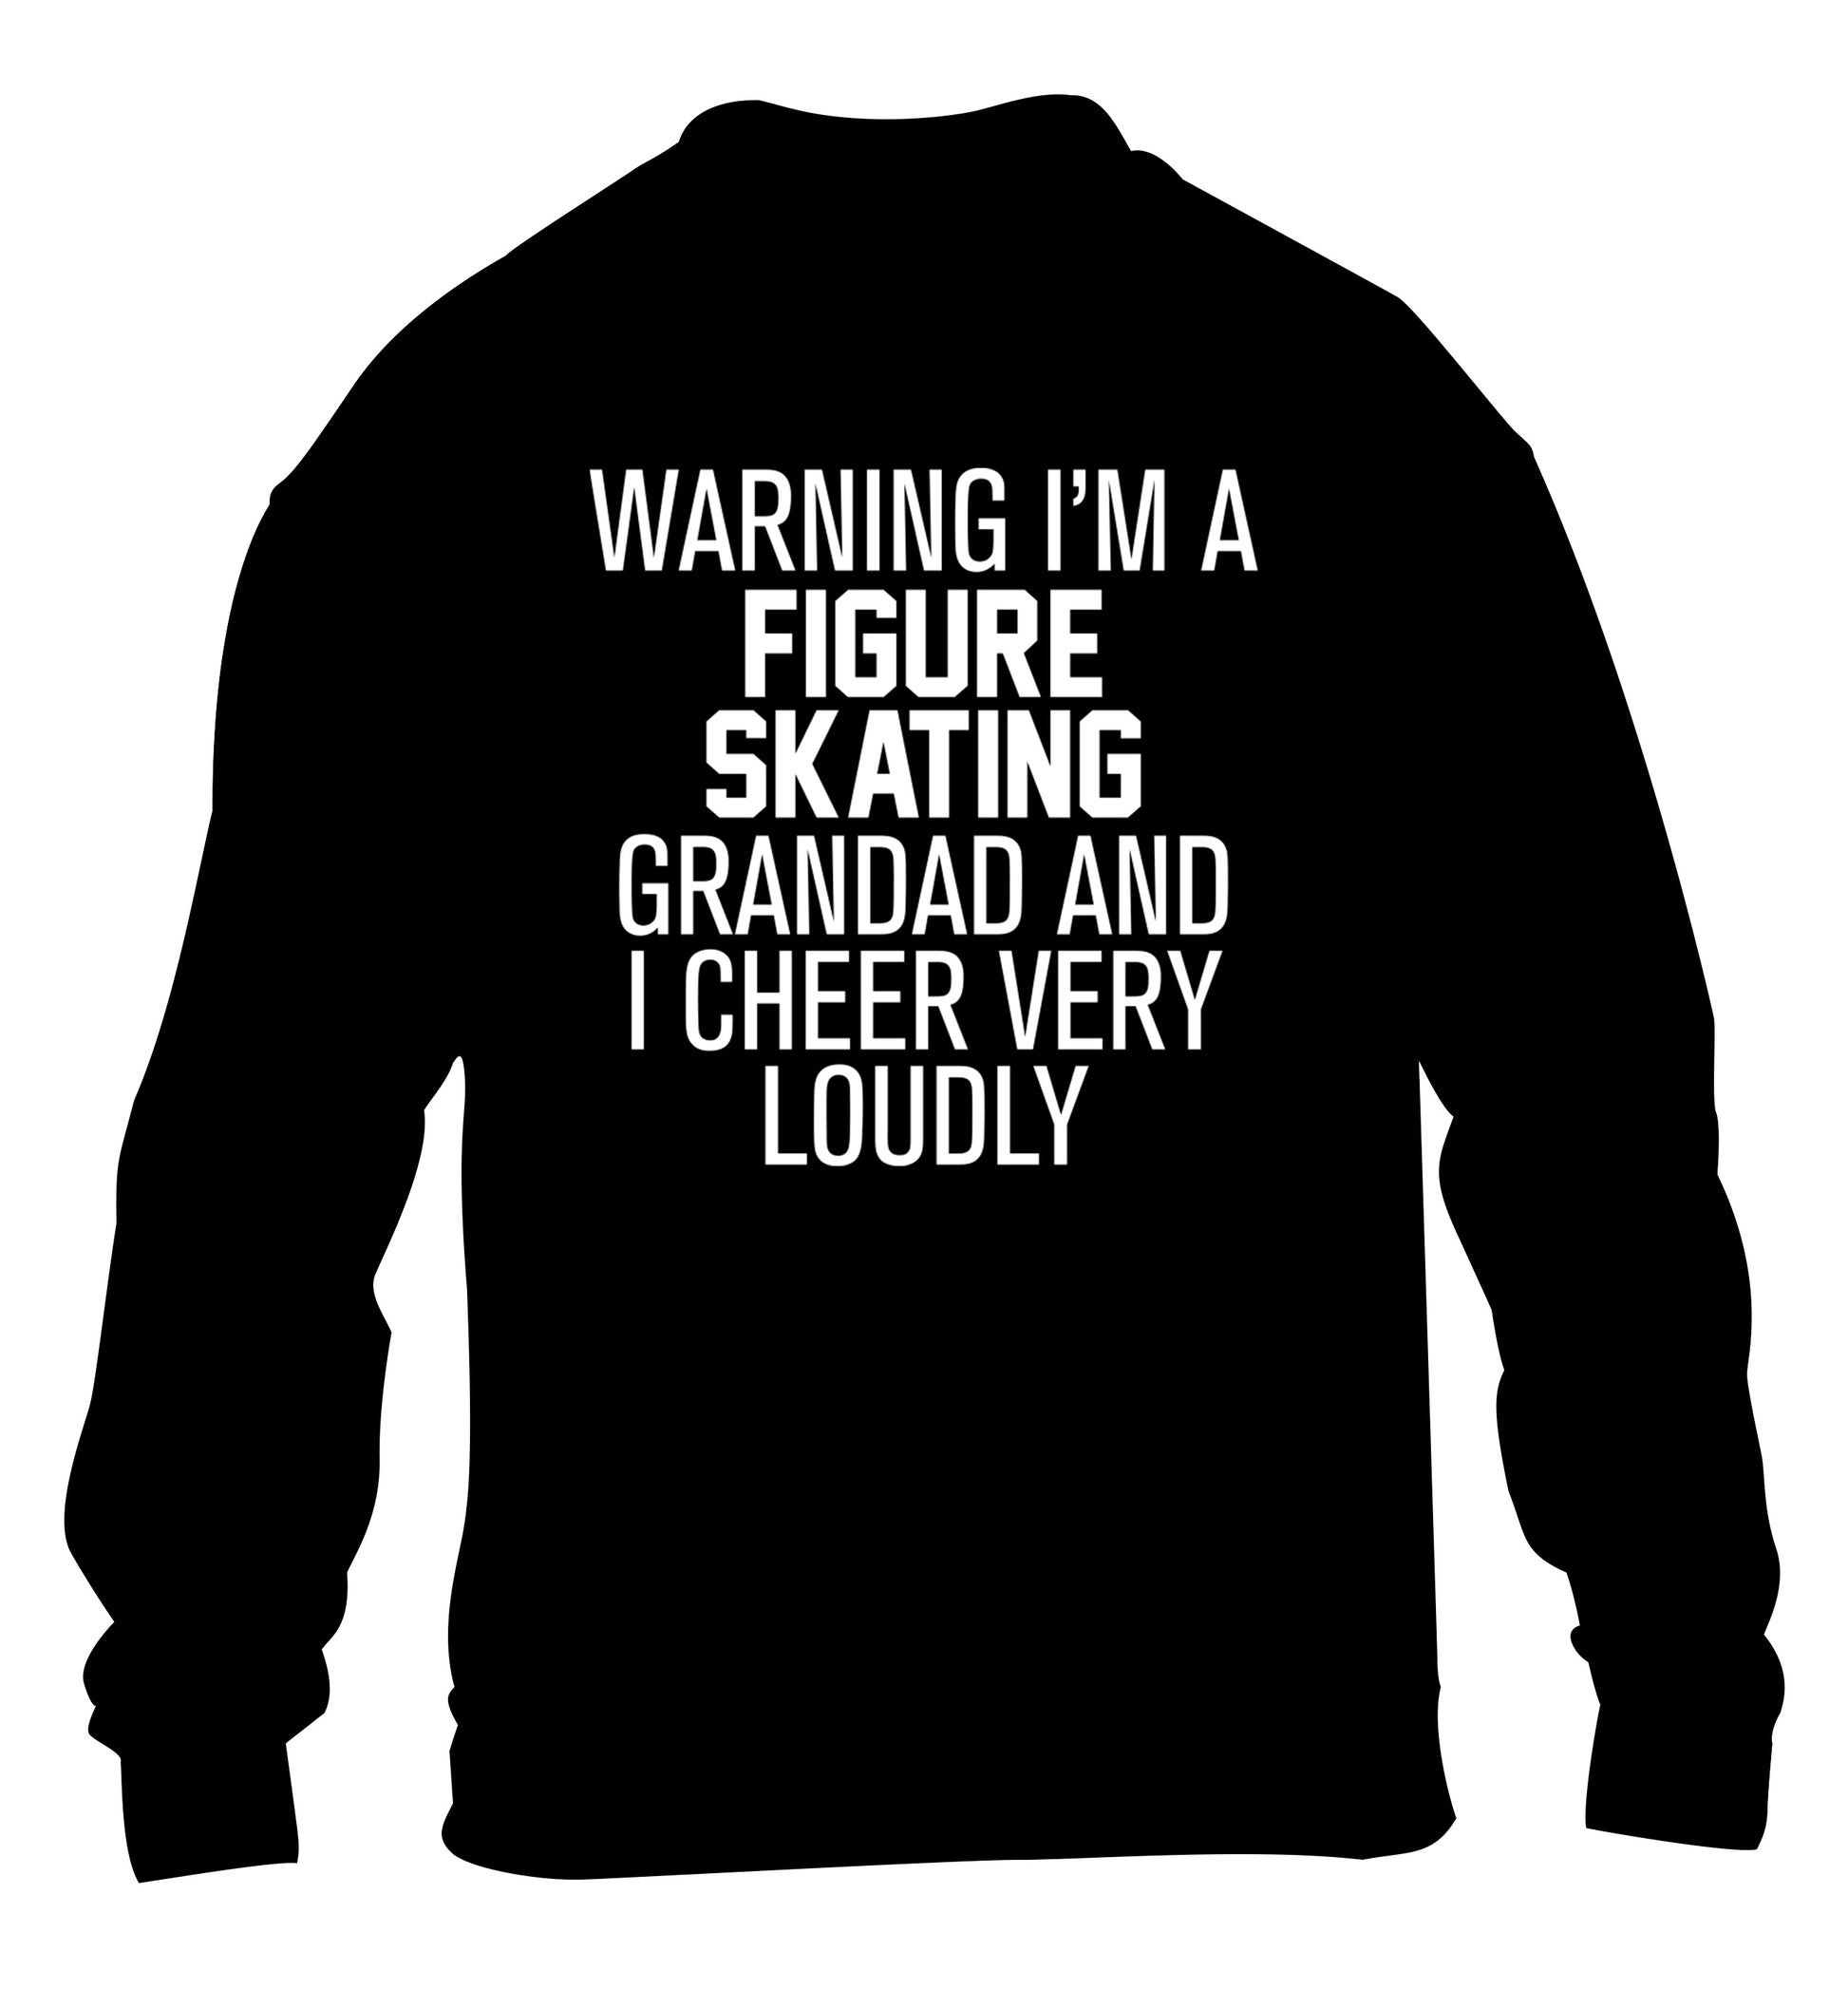 Warning I'm a figure skating grandad and I cheer very loudly children's black sweater 12-14 Years